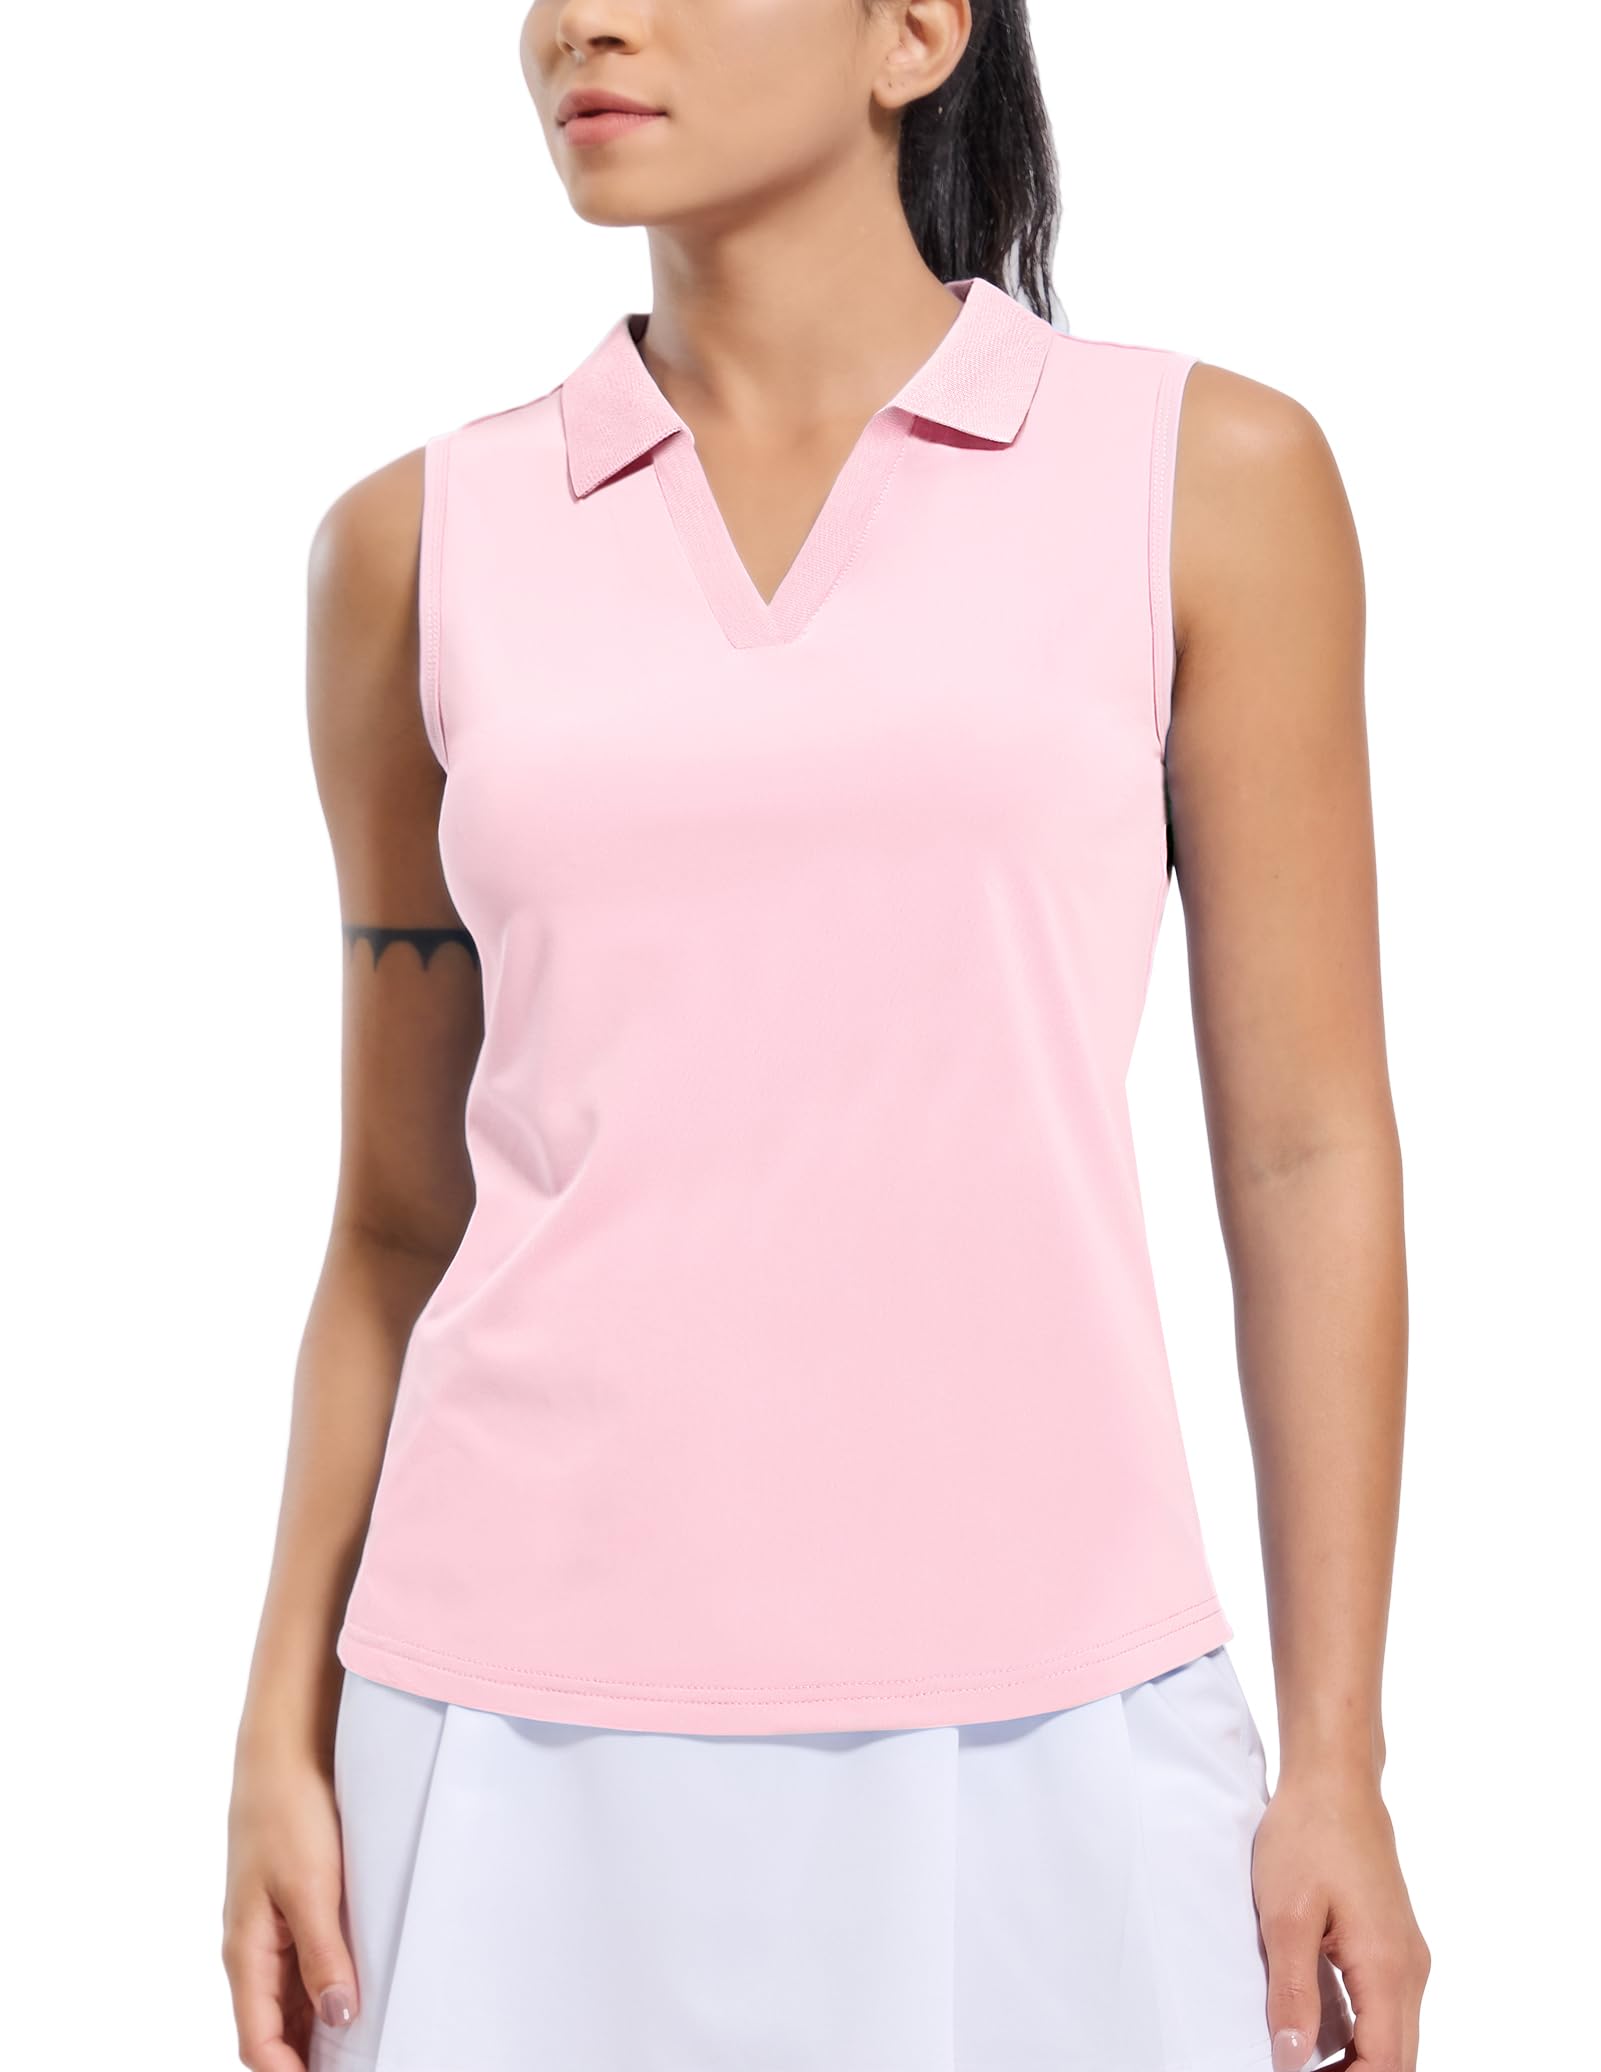 Women's Sleeveless Golf Polo Shirts Dry Fit Collared Tank Tops